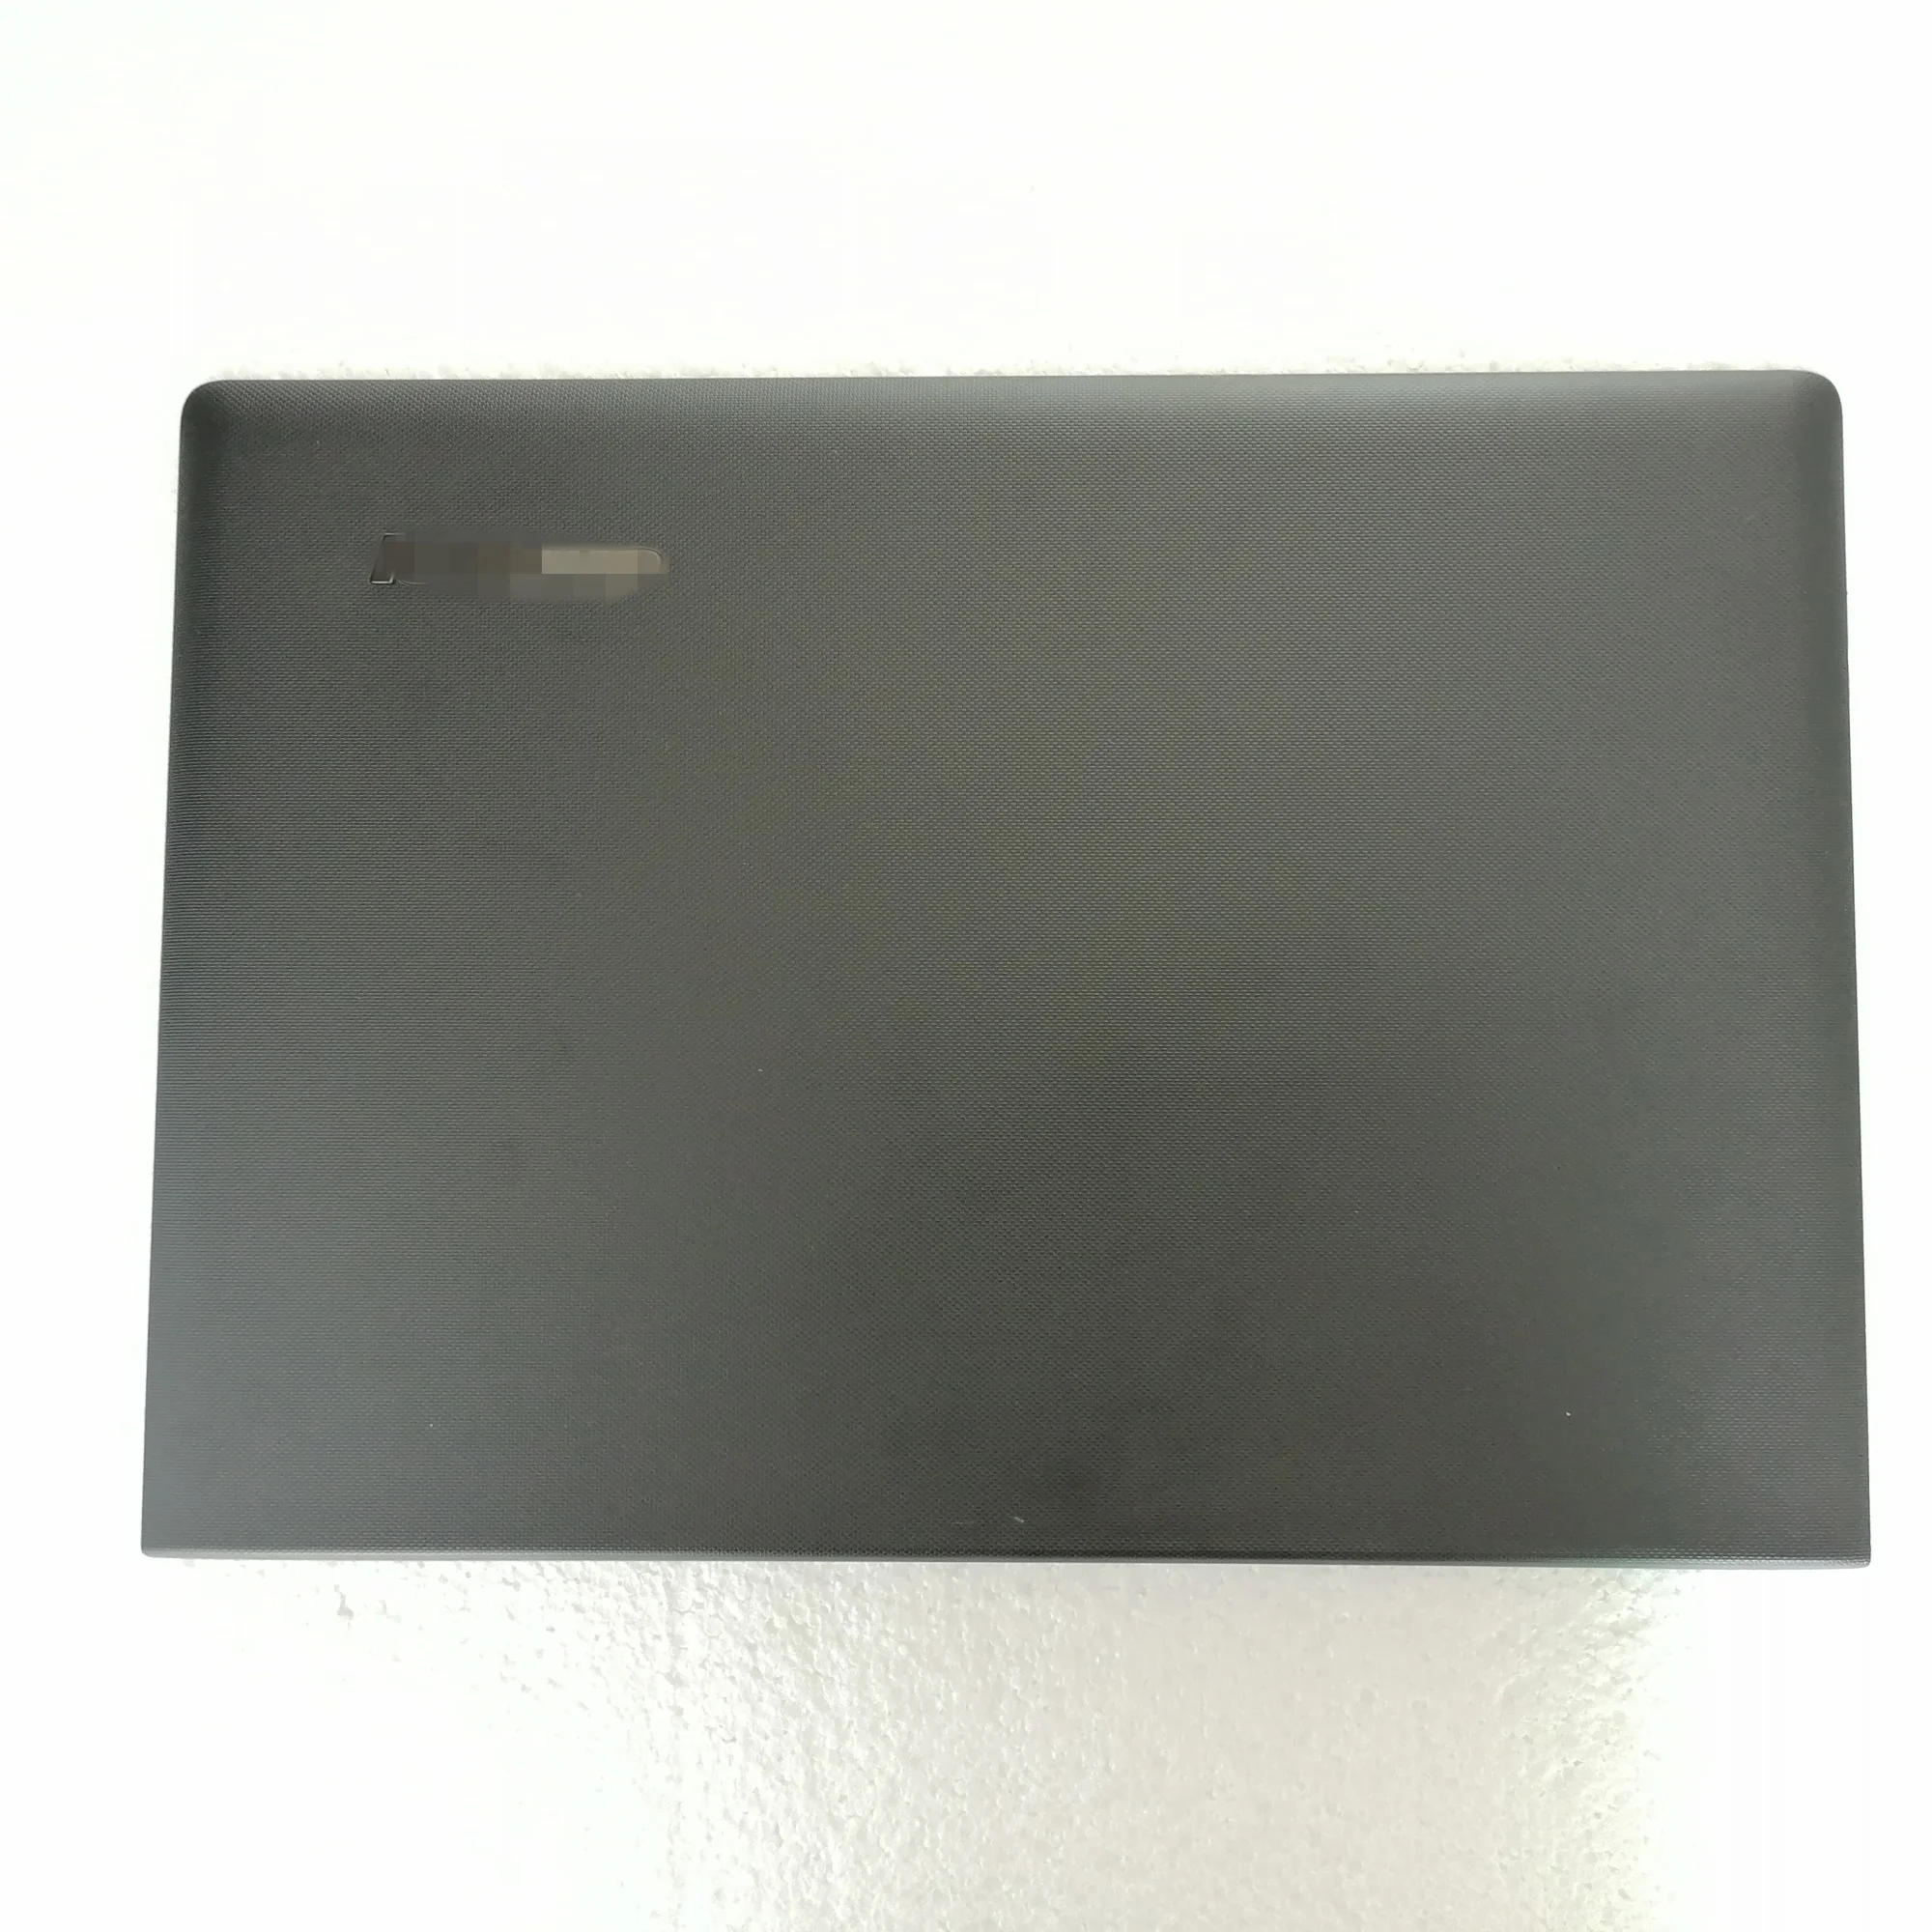 

New And Original For Lenovo G40-70 G40-80 G40-30 G40-45 Laptop LCD Back Cover FRU:90205103